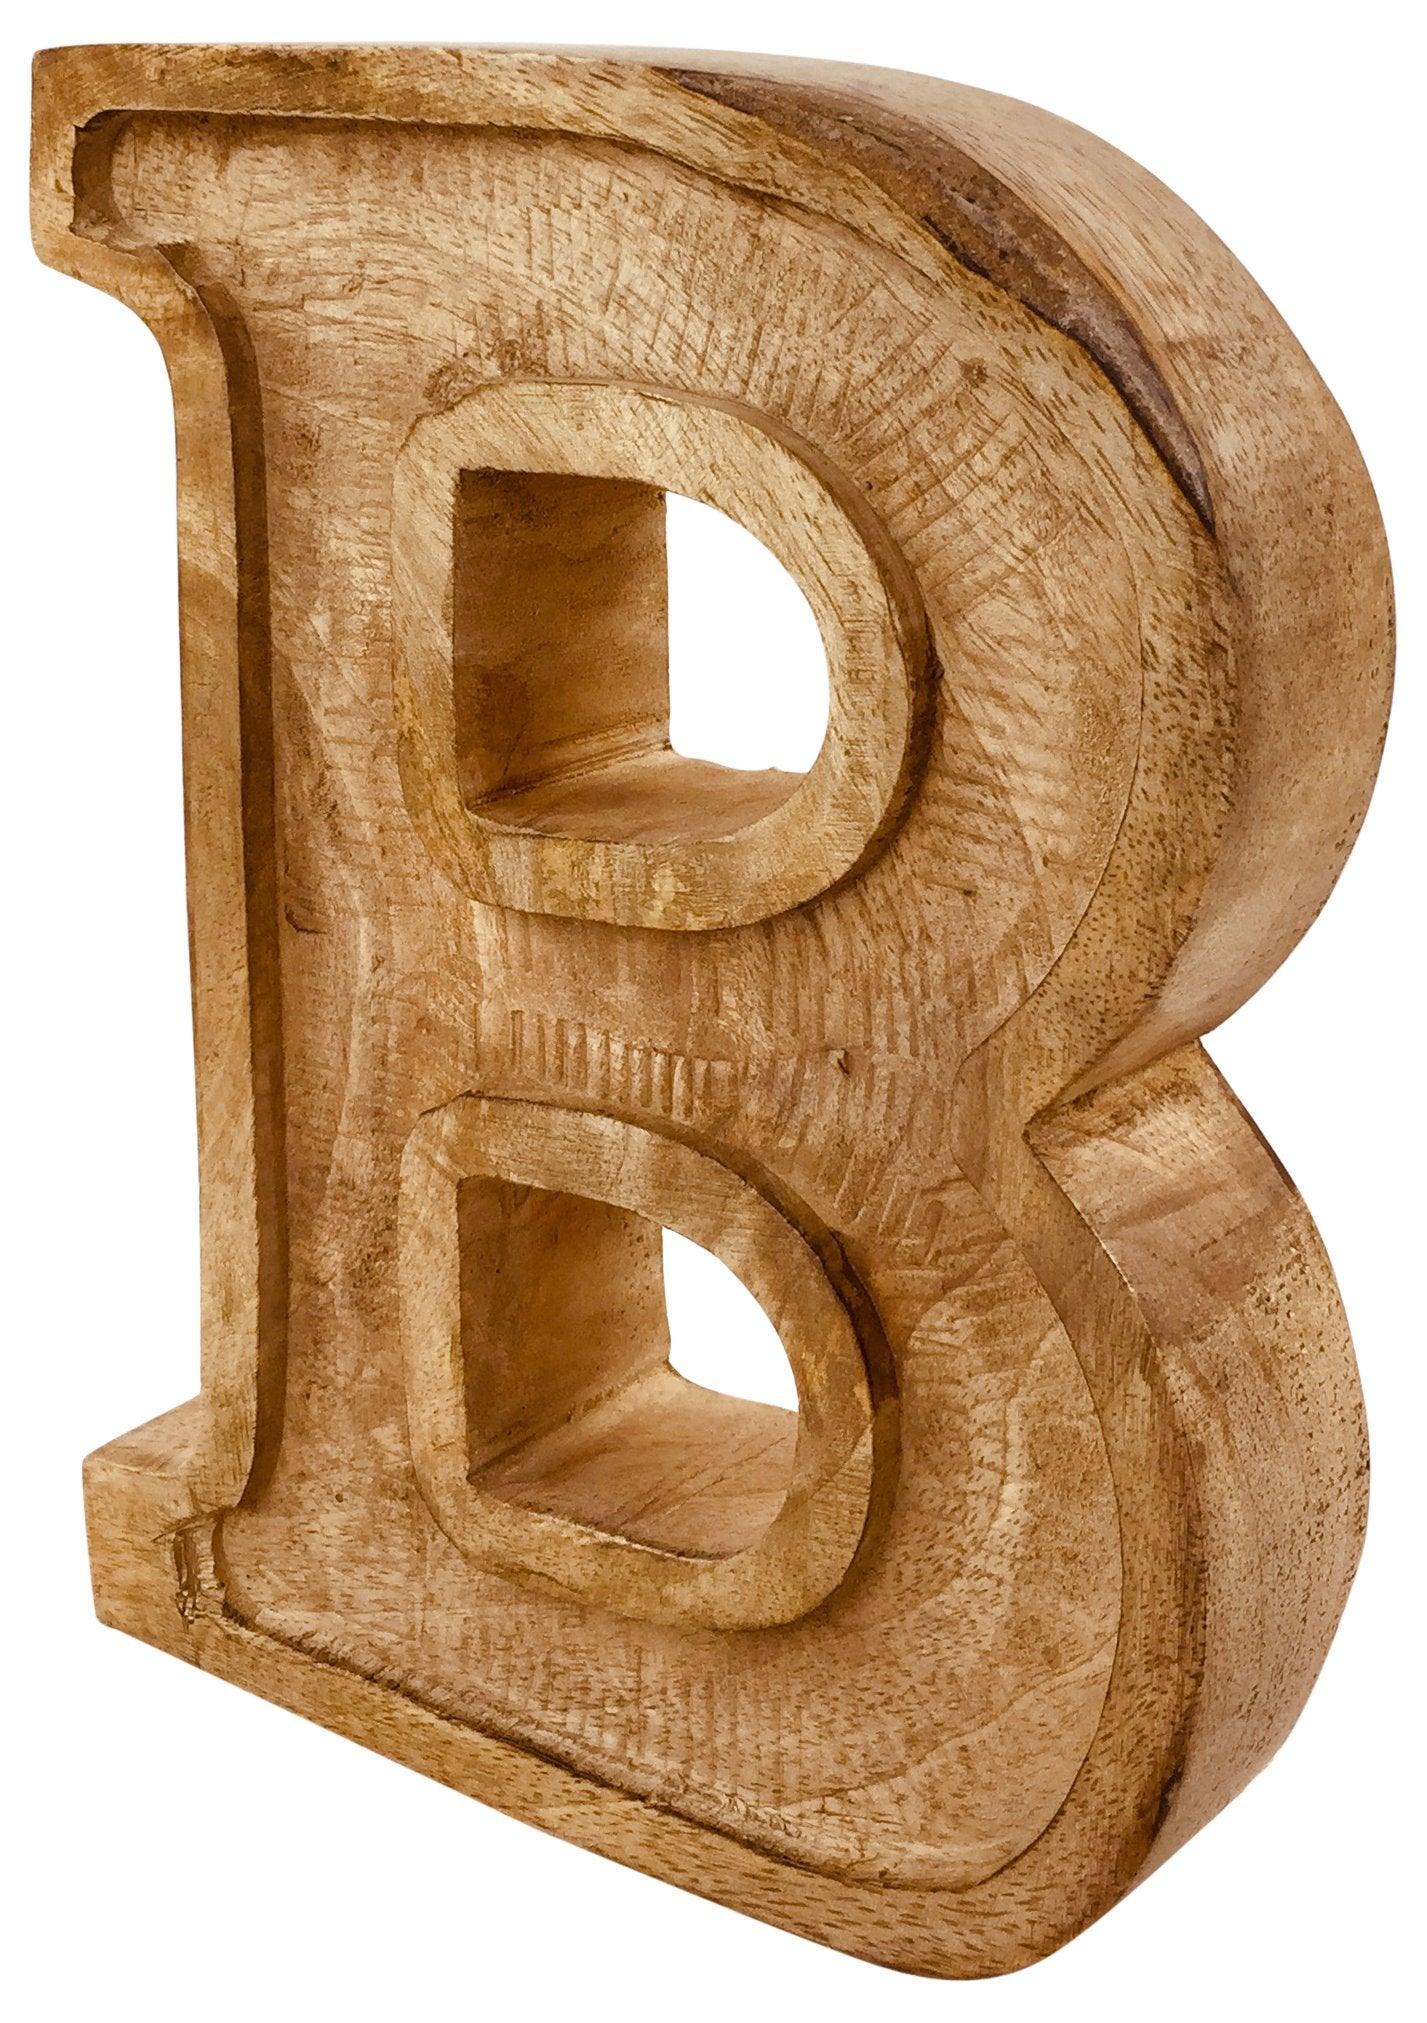 View Hand Carved Wooden Embossed Letter B information